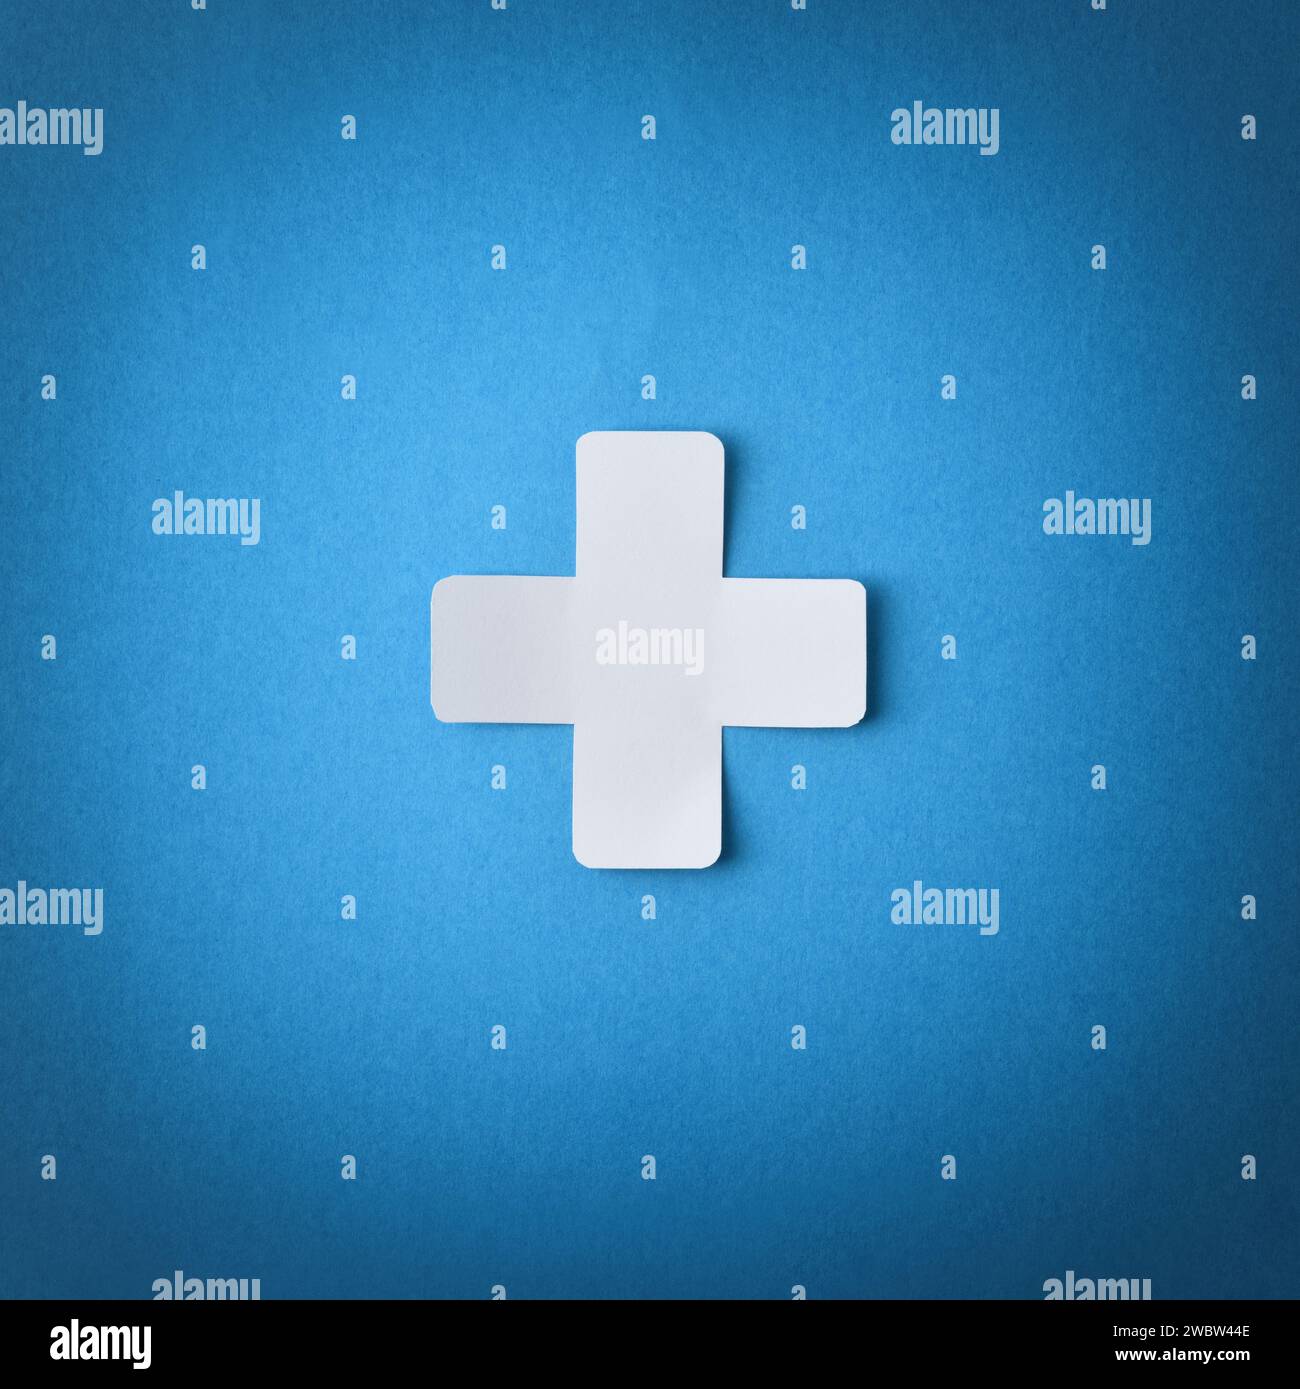 Conceptual symbol with cross shaped paper cutout isolated in the center on blue background. Square composition Stock Photo